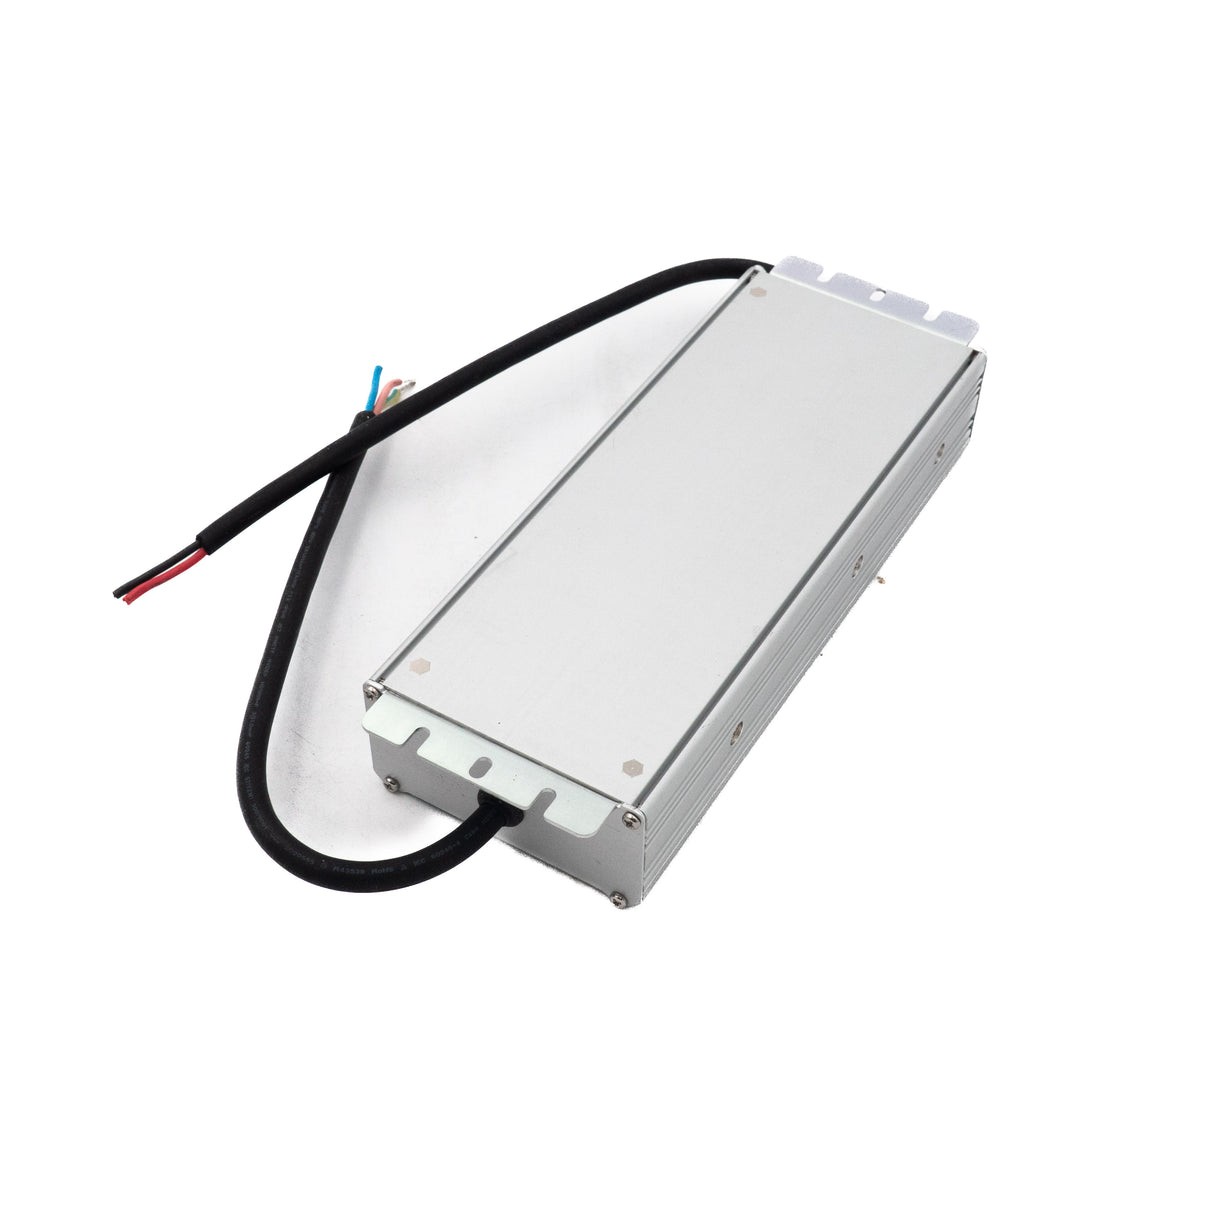 Mean Well HLG-320H-36A Power Supply 320W 36V - Adjustable - PHOTO 3